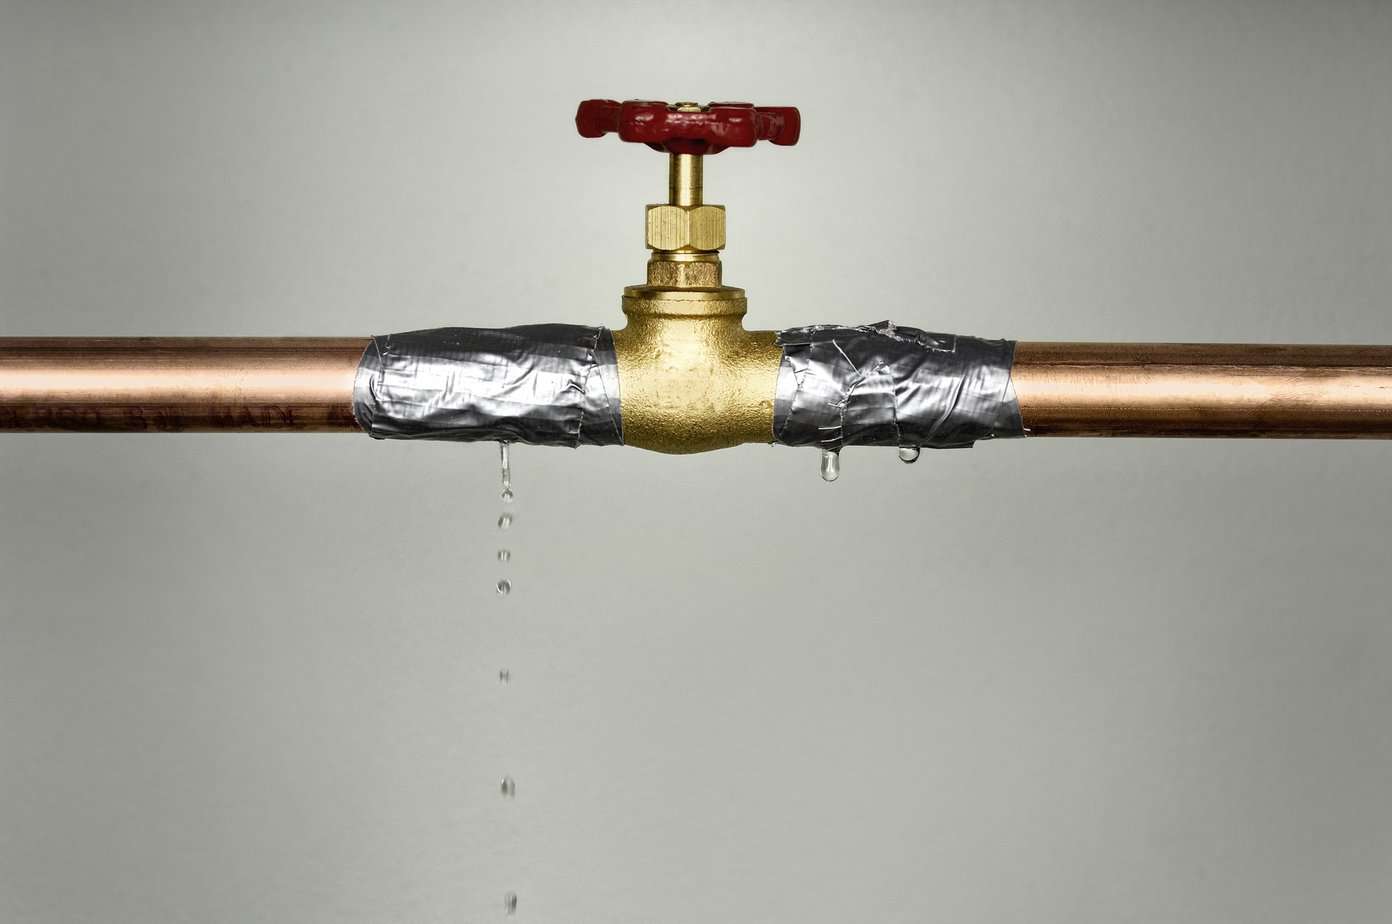 Closeup shot of the leaking water pipe with red valve